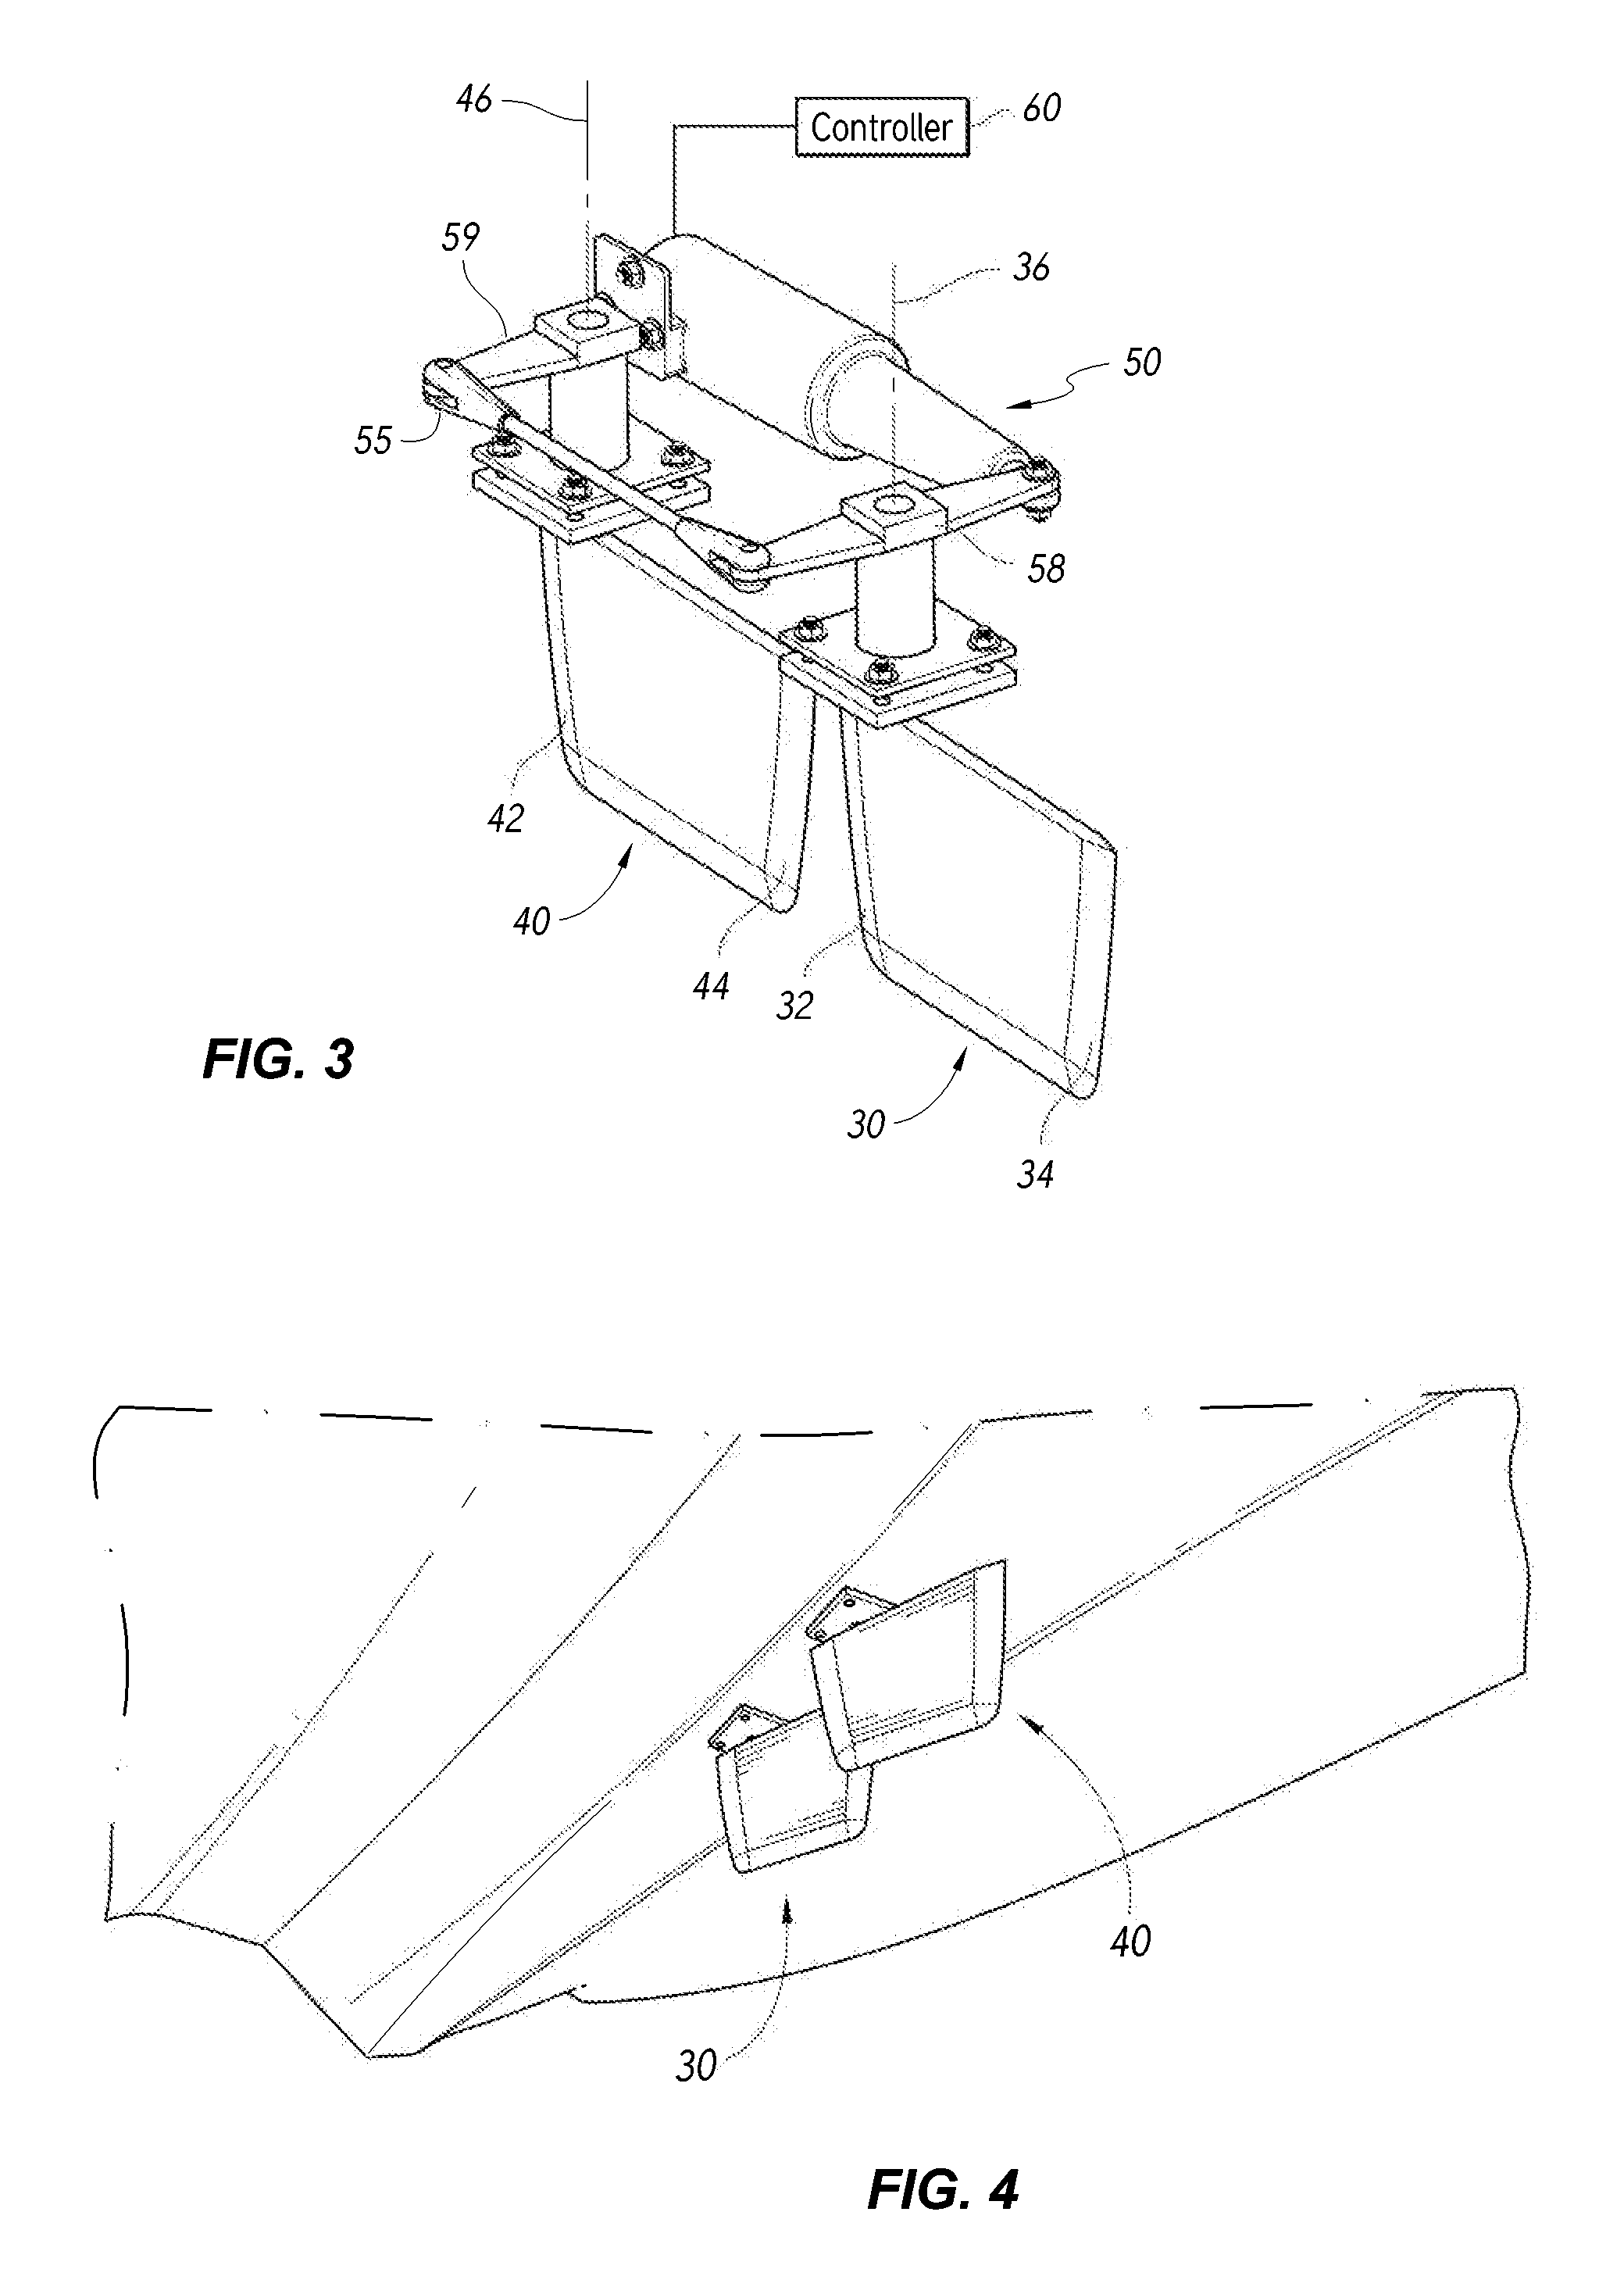 Surf wake system and method for a watercraft